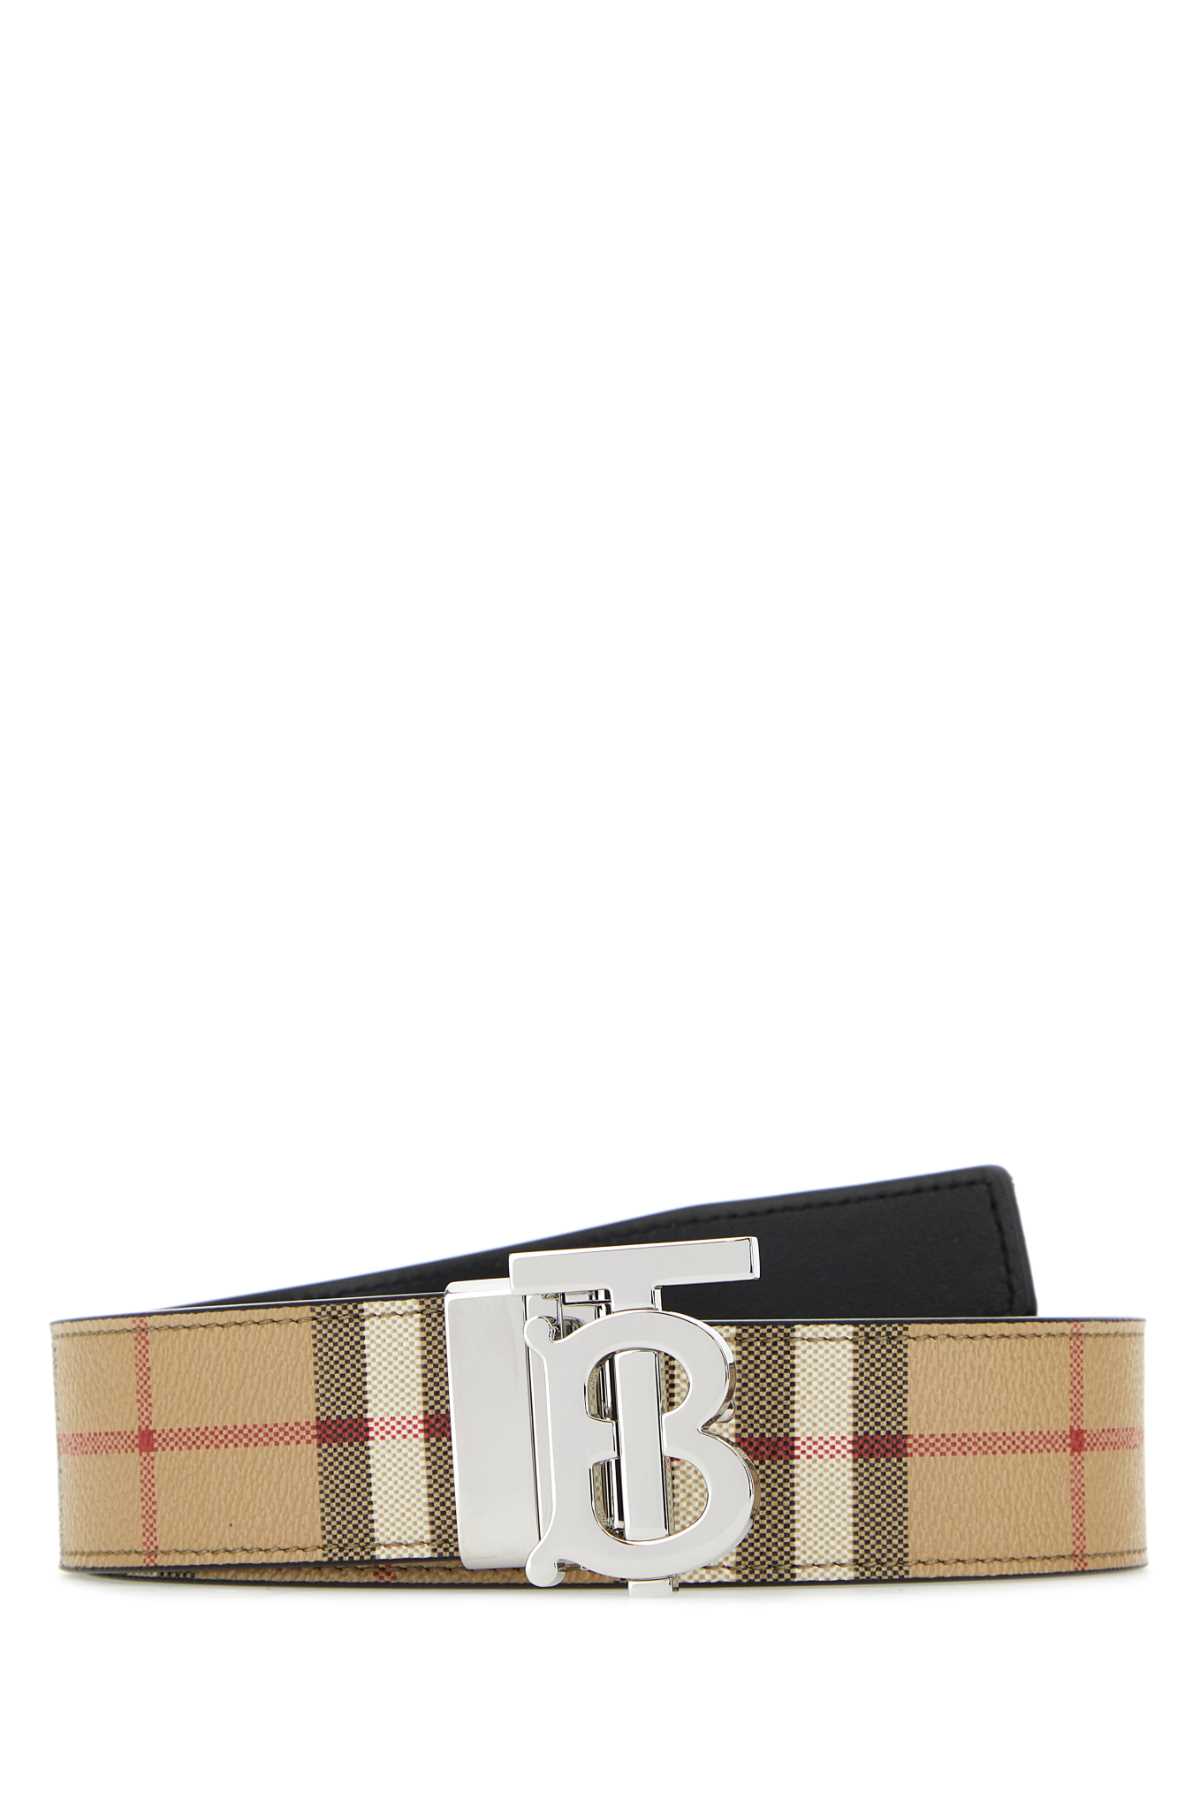 Shop Burberry Printed Canvas Belt In Archivebeigesilver